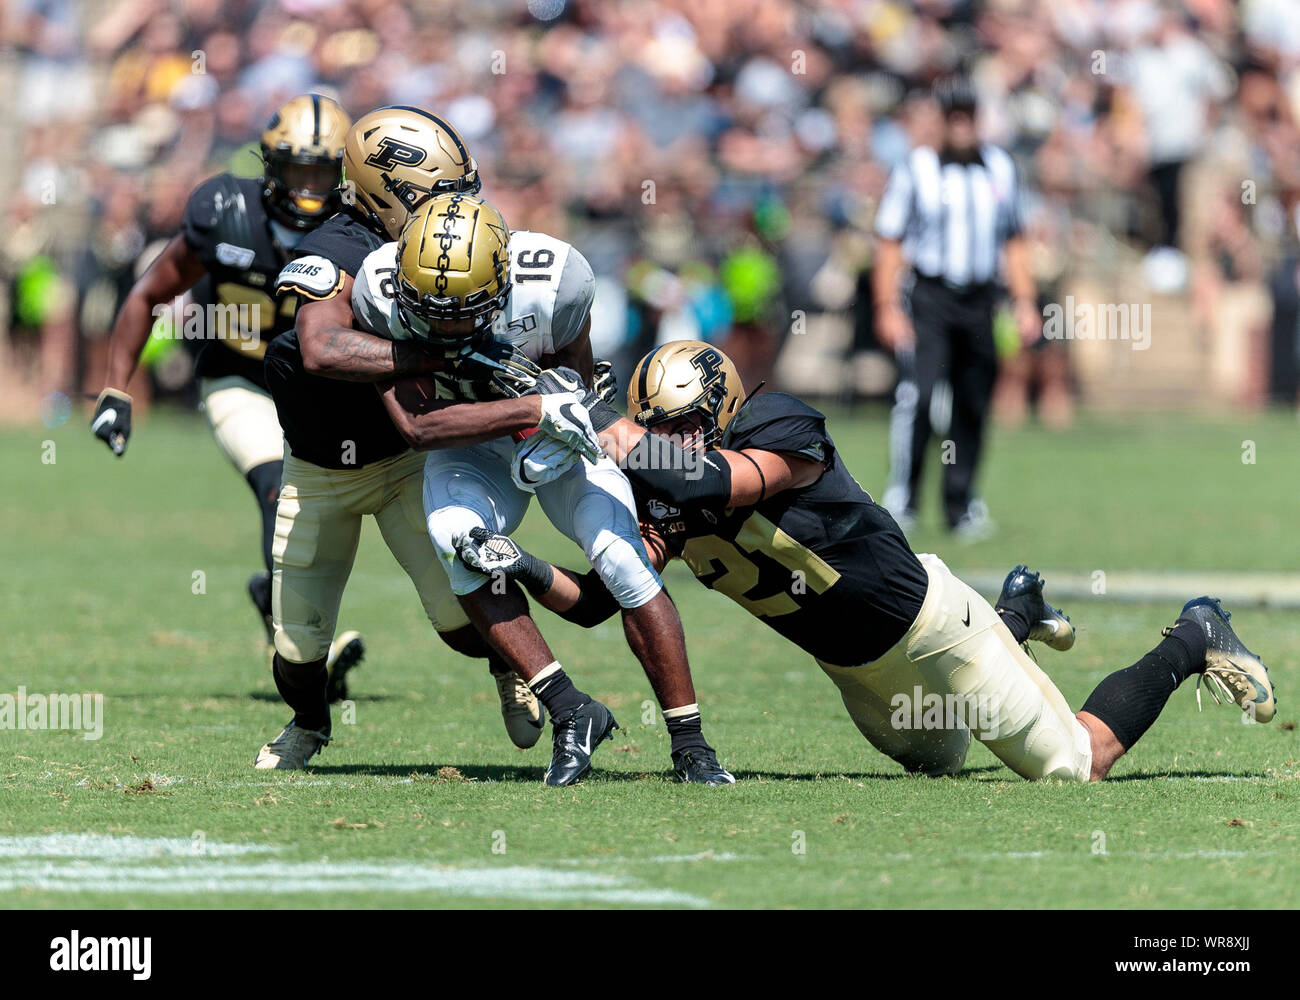 September 07, 2019: Vanderbilt wide receiver Kalija Lipscomb (16) runs with the ball as Purdue linebacker Markus Bailey (21) attempts to make the tackle during NCAA football game action between the Vanderbilt Commodores and the Purdue Boilermakers at Ross-Ade Stadium in West Lafayette, Indiana. Purdue defeated Vanderbilt 42-24. John Mersits/CSM. Stock Photo